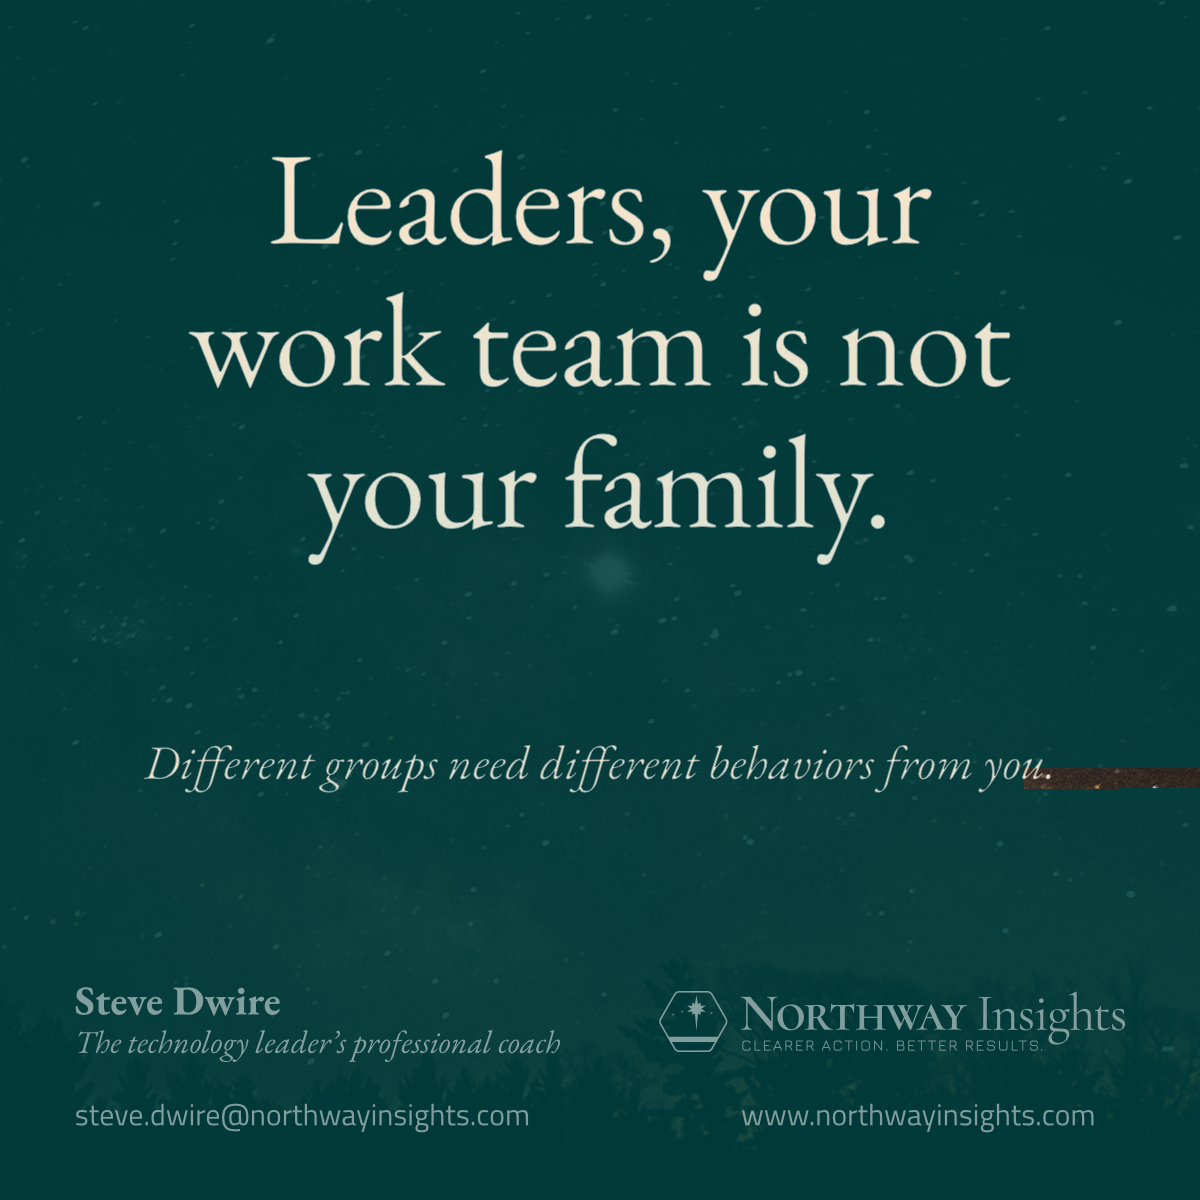 Leaders, your work team is not your family. (Different groups need different behaiors from you.)